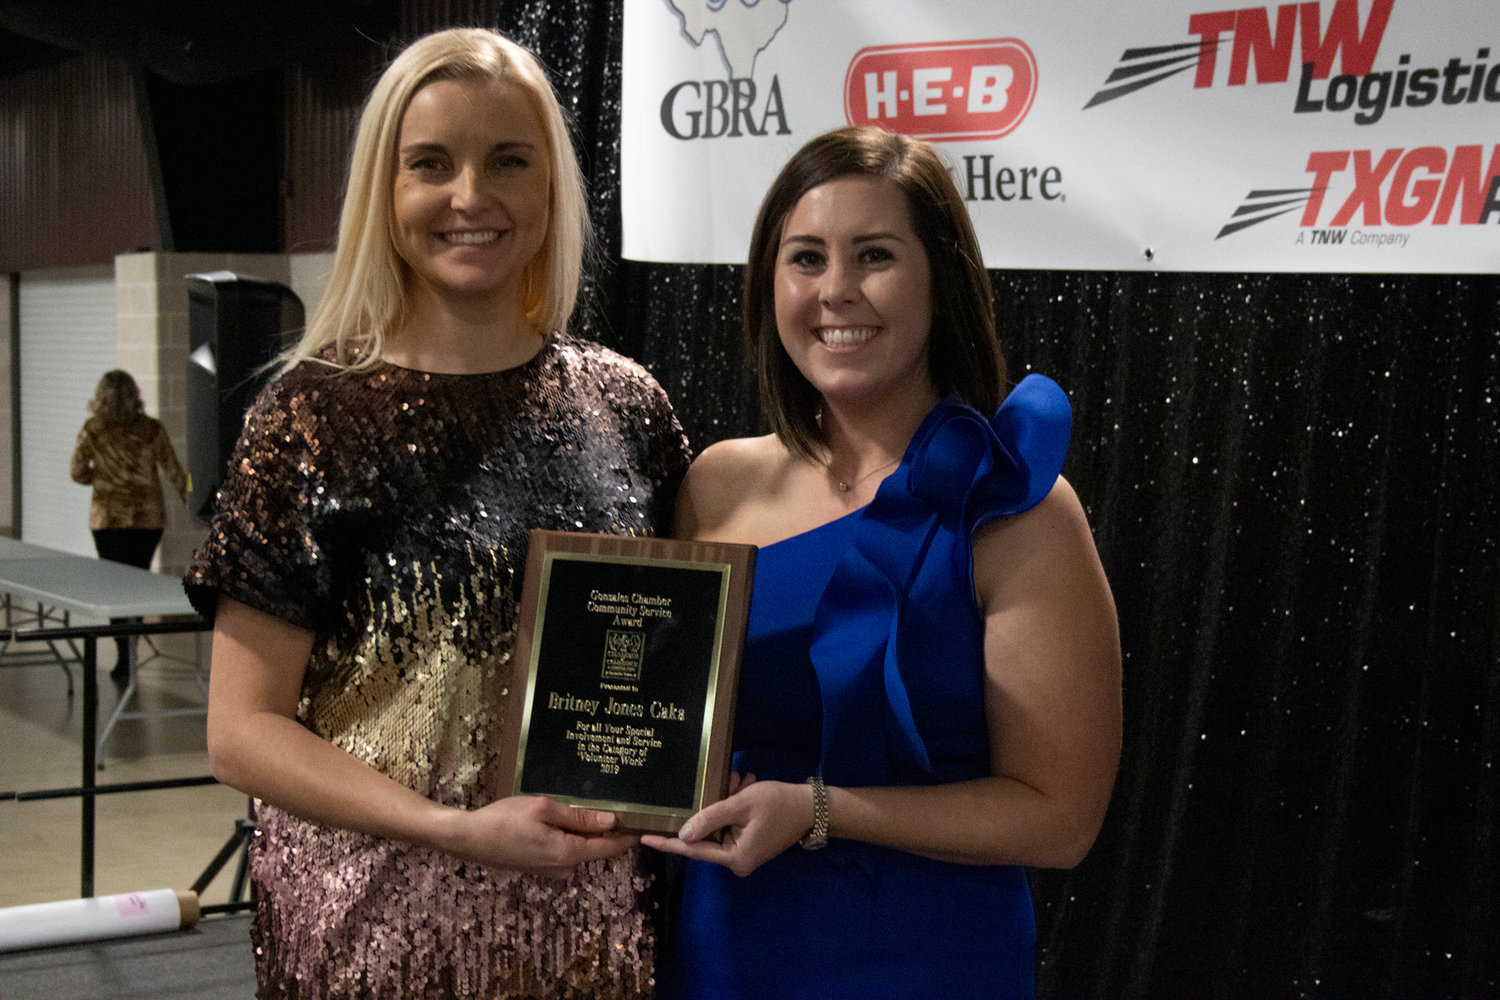 Community Service Award Winner recipient Britney Čaka poses with her Community Service Award and Gonzales Chamber of Commerce and Agriculture Executive Director Daisy Scheske Freeman.